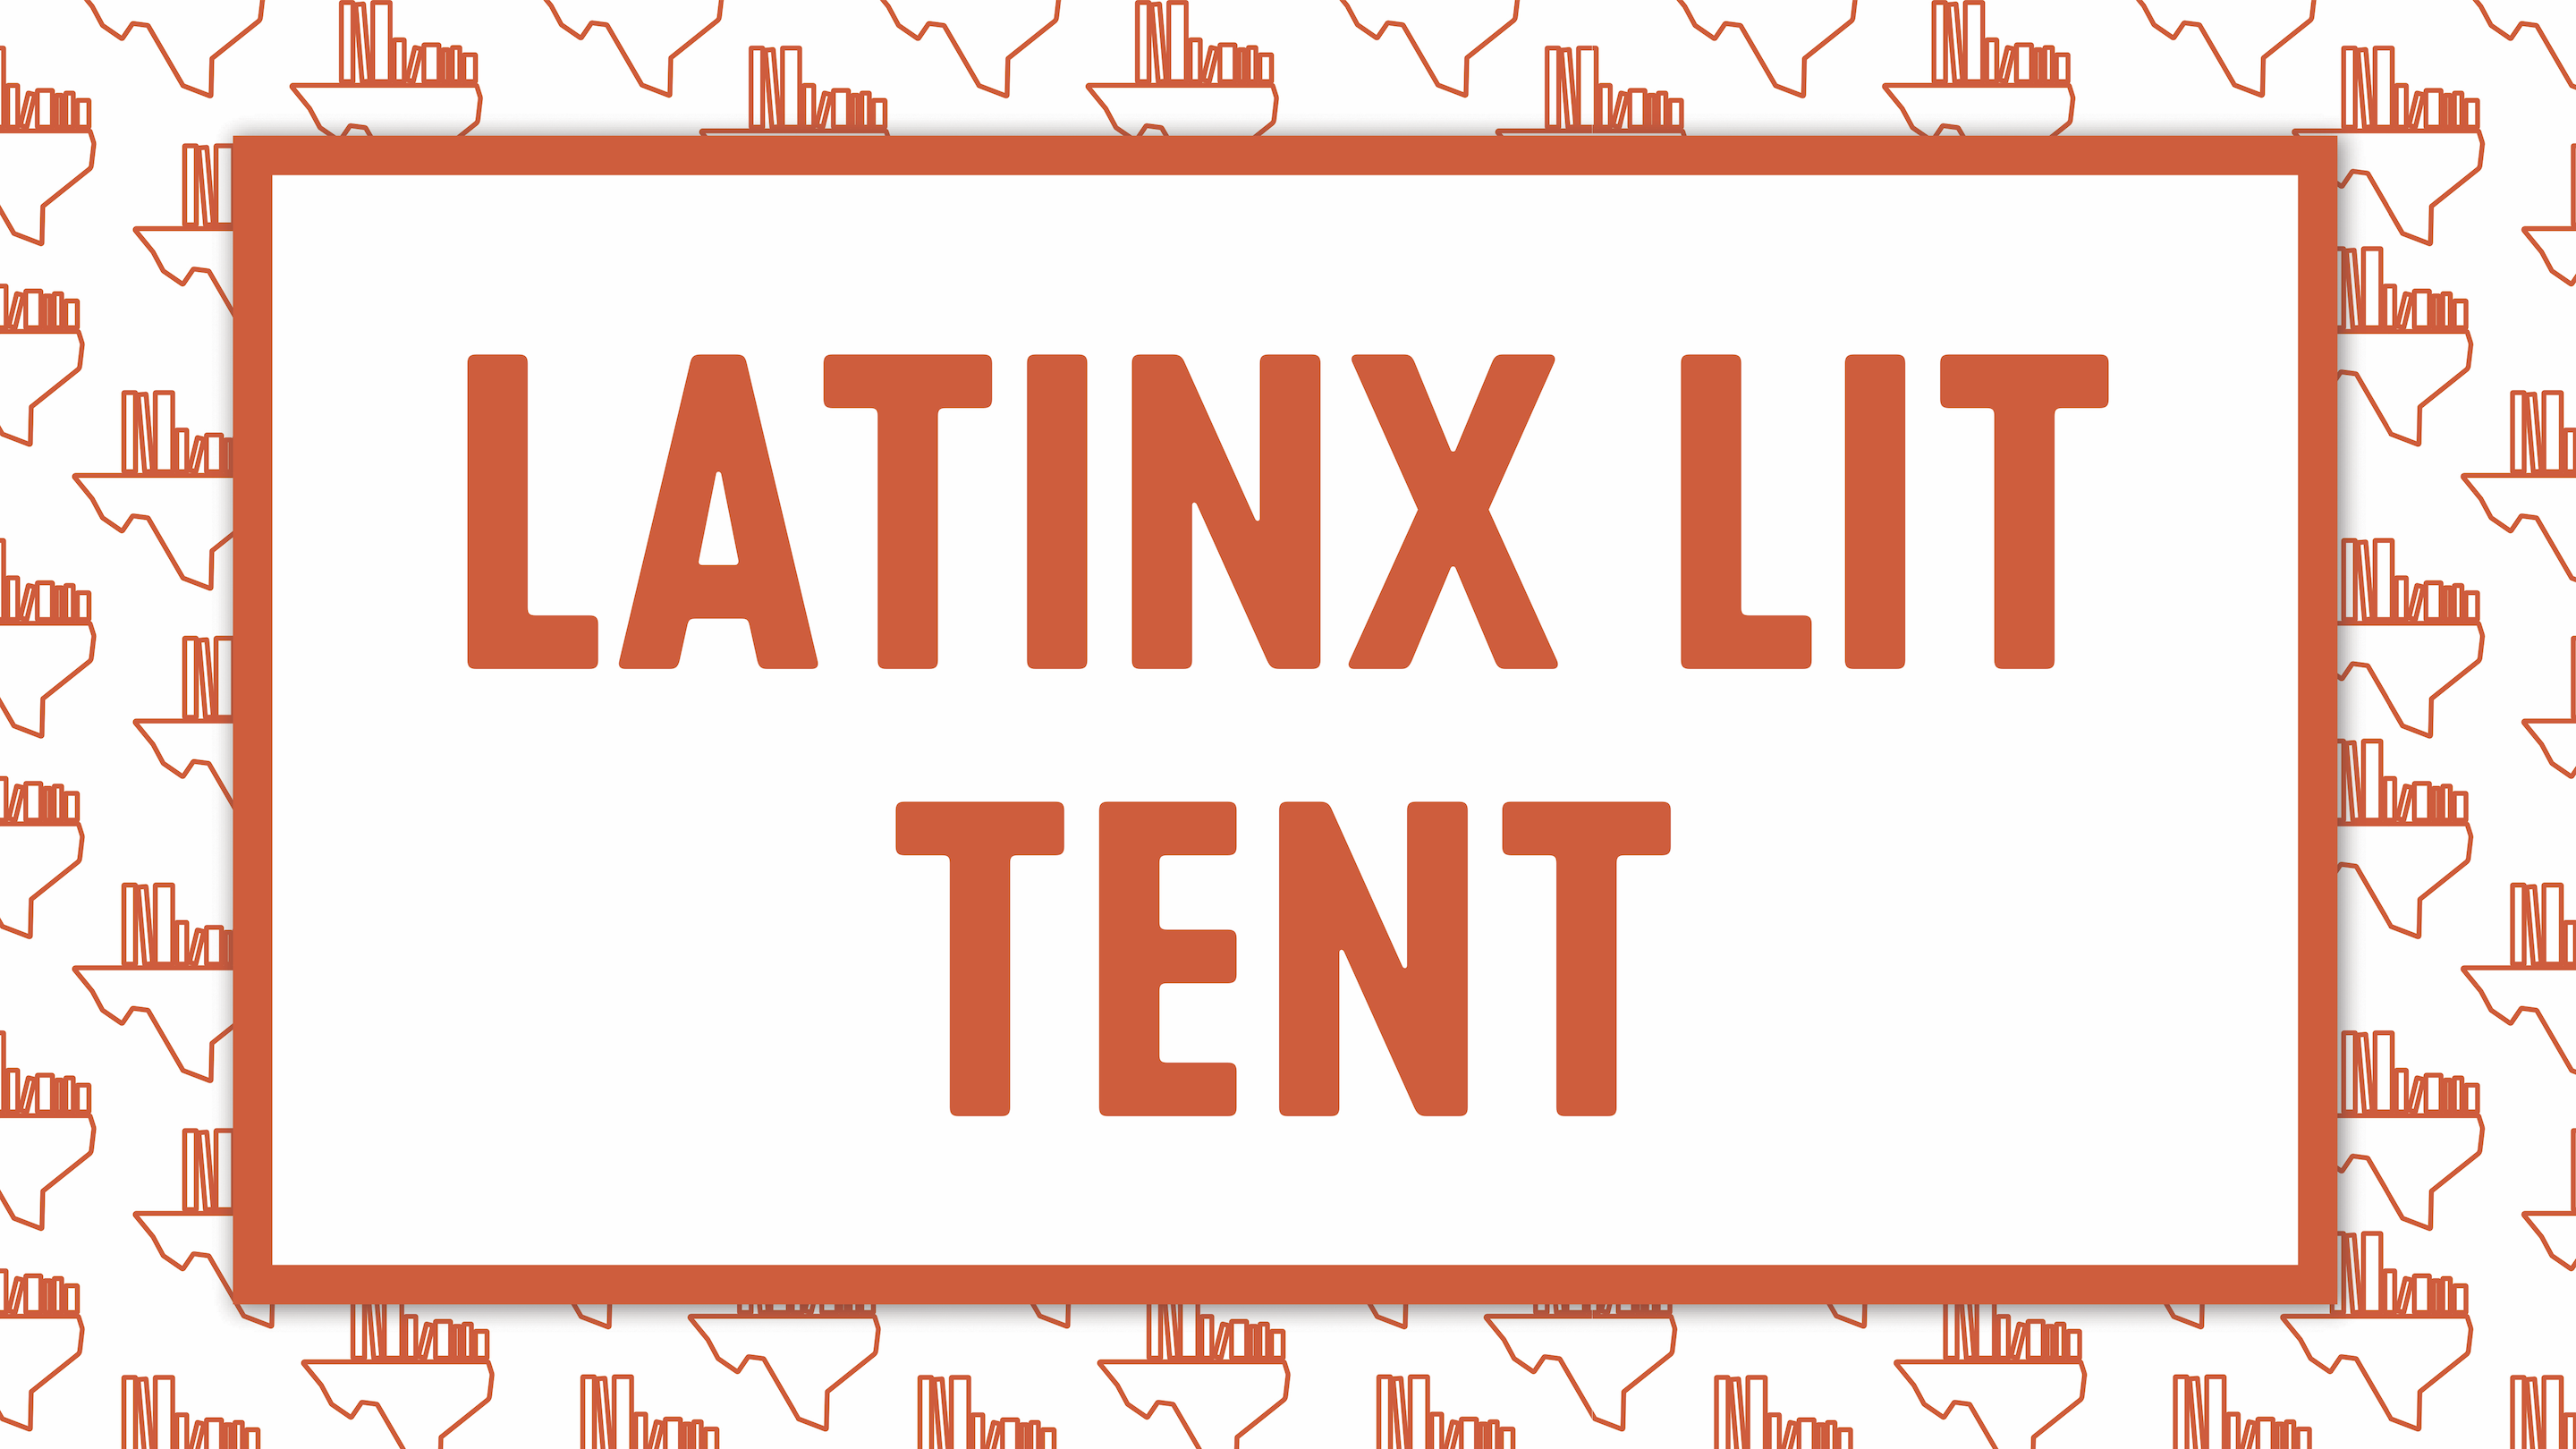 Discover New Literature at the Latinx Lit Tent